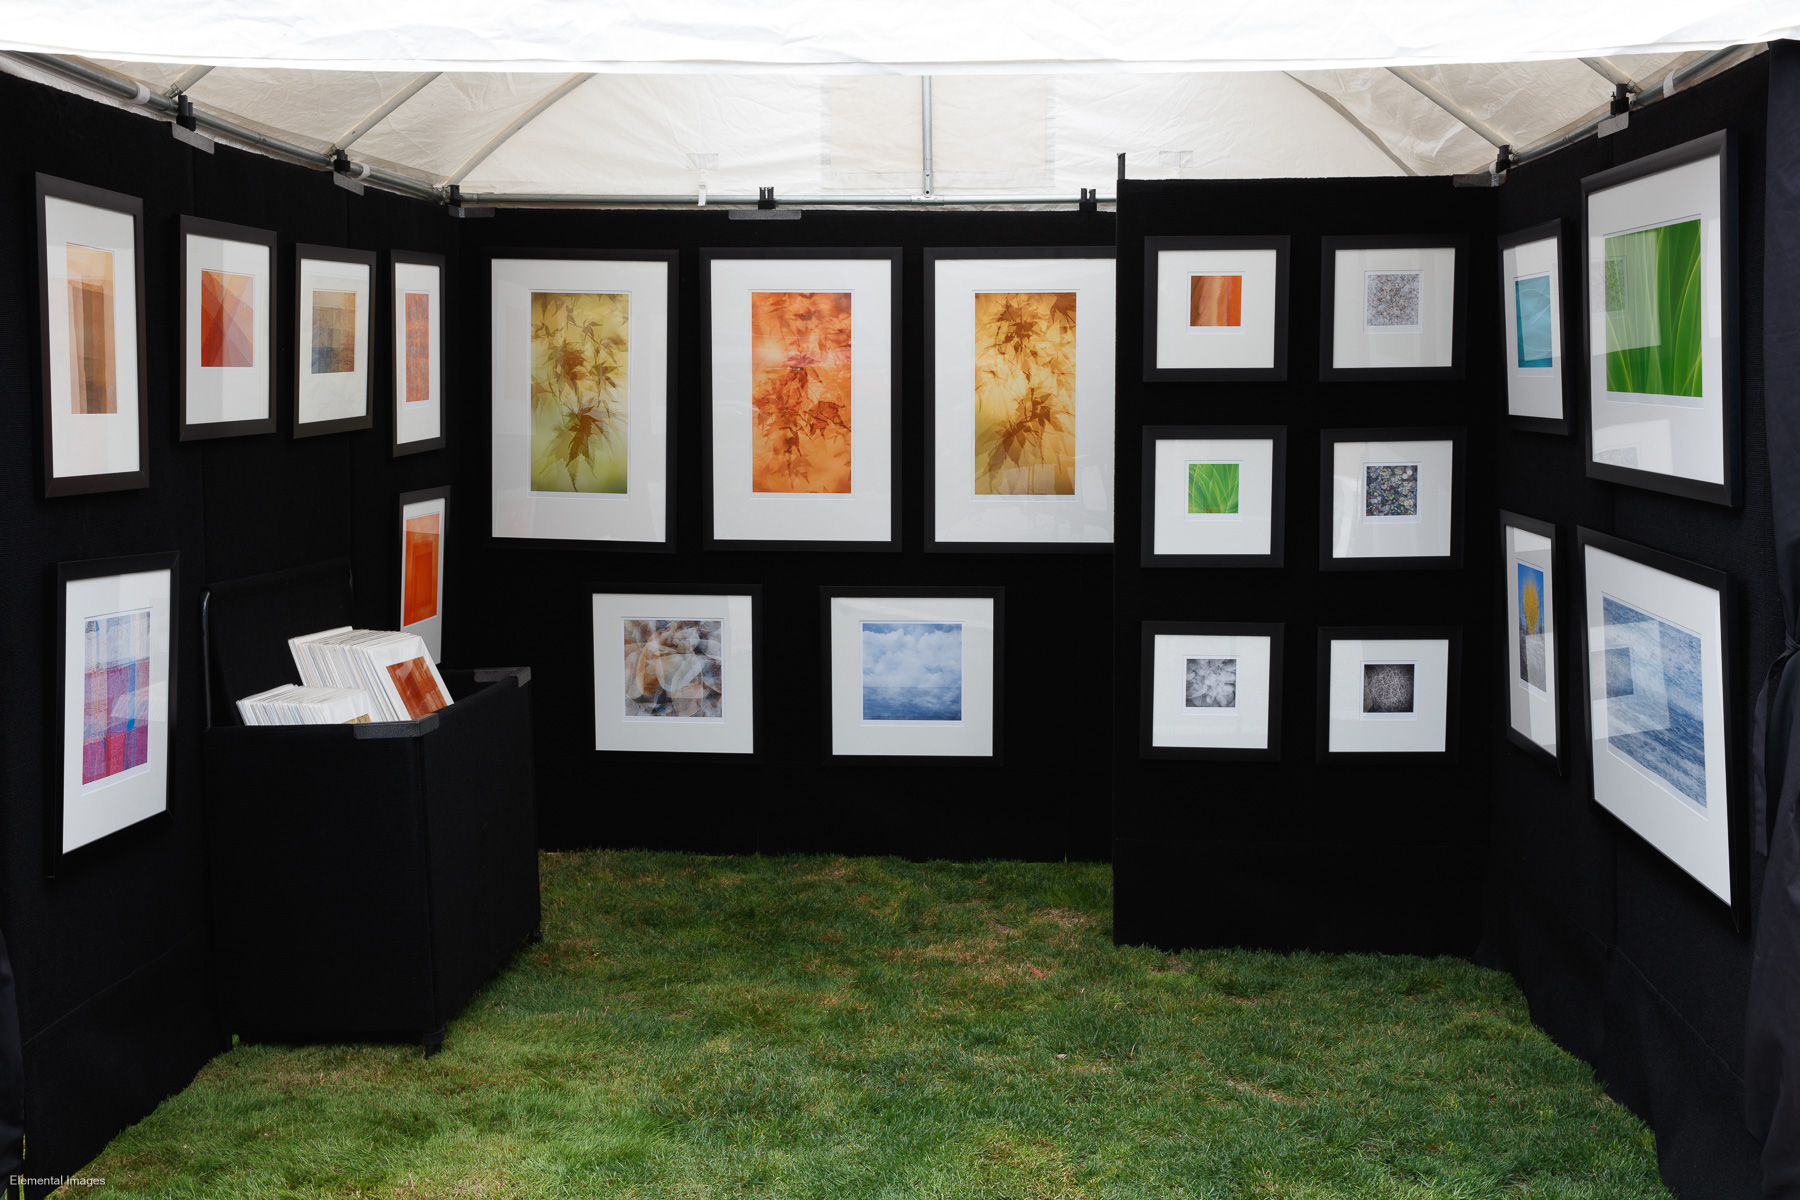 Selection of framed prints on display in outdoor art show booth |  |  |  - © Elemental Images - All Rights Reserved Worldwide